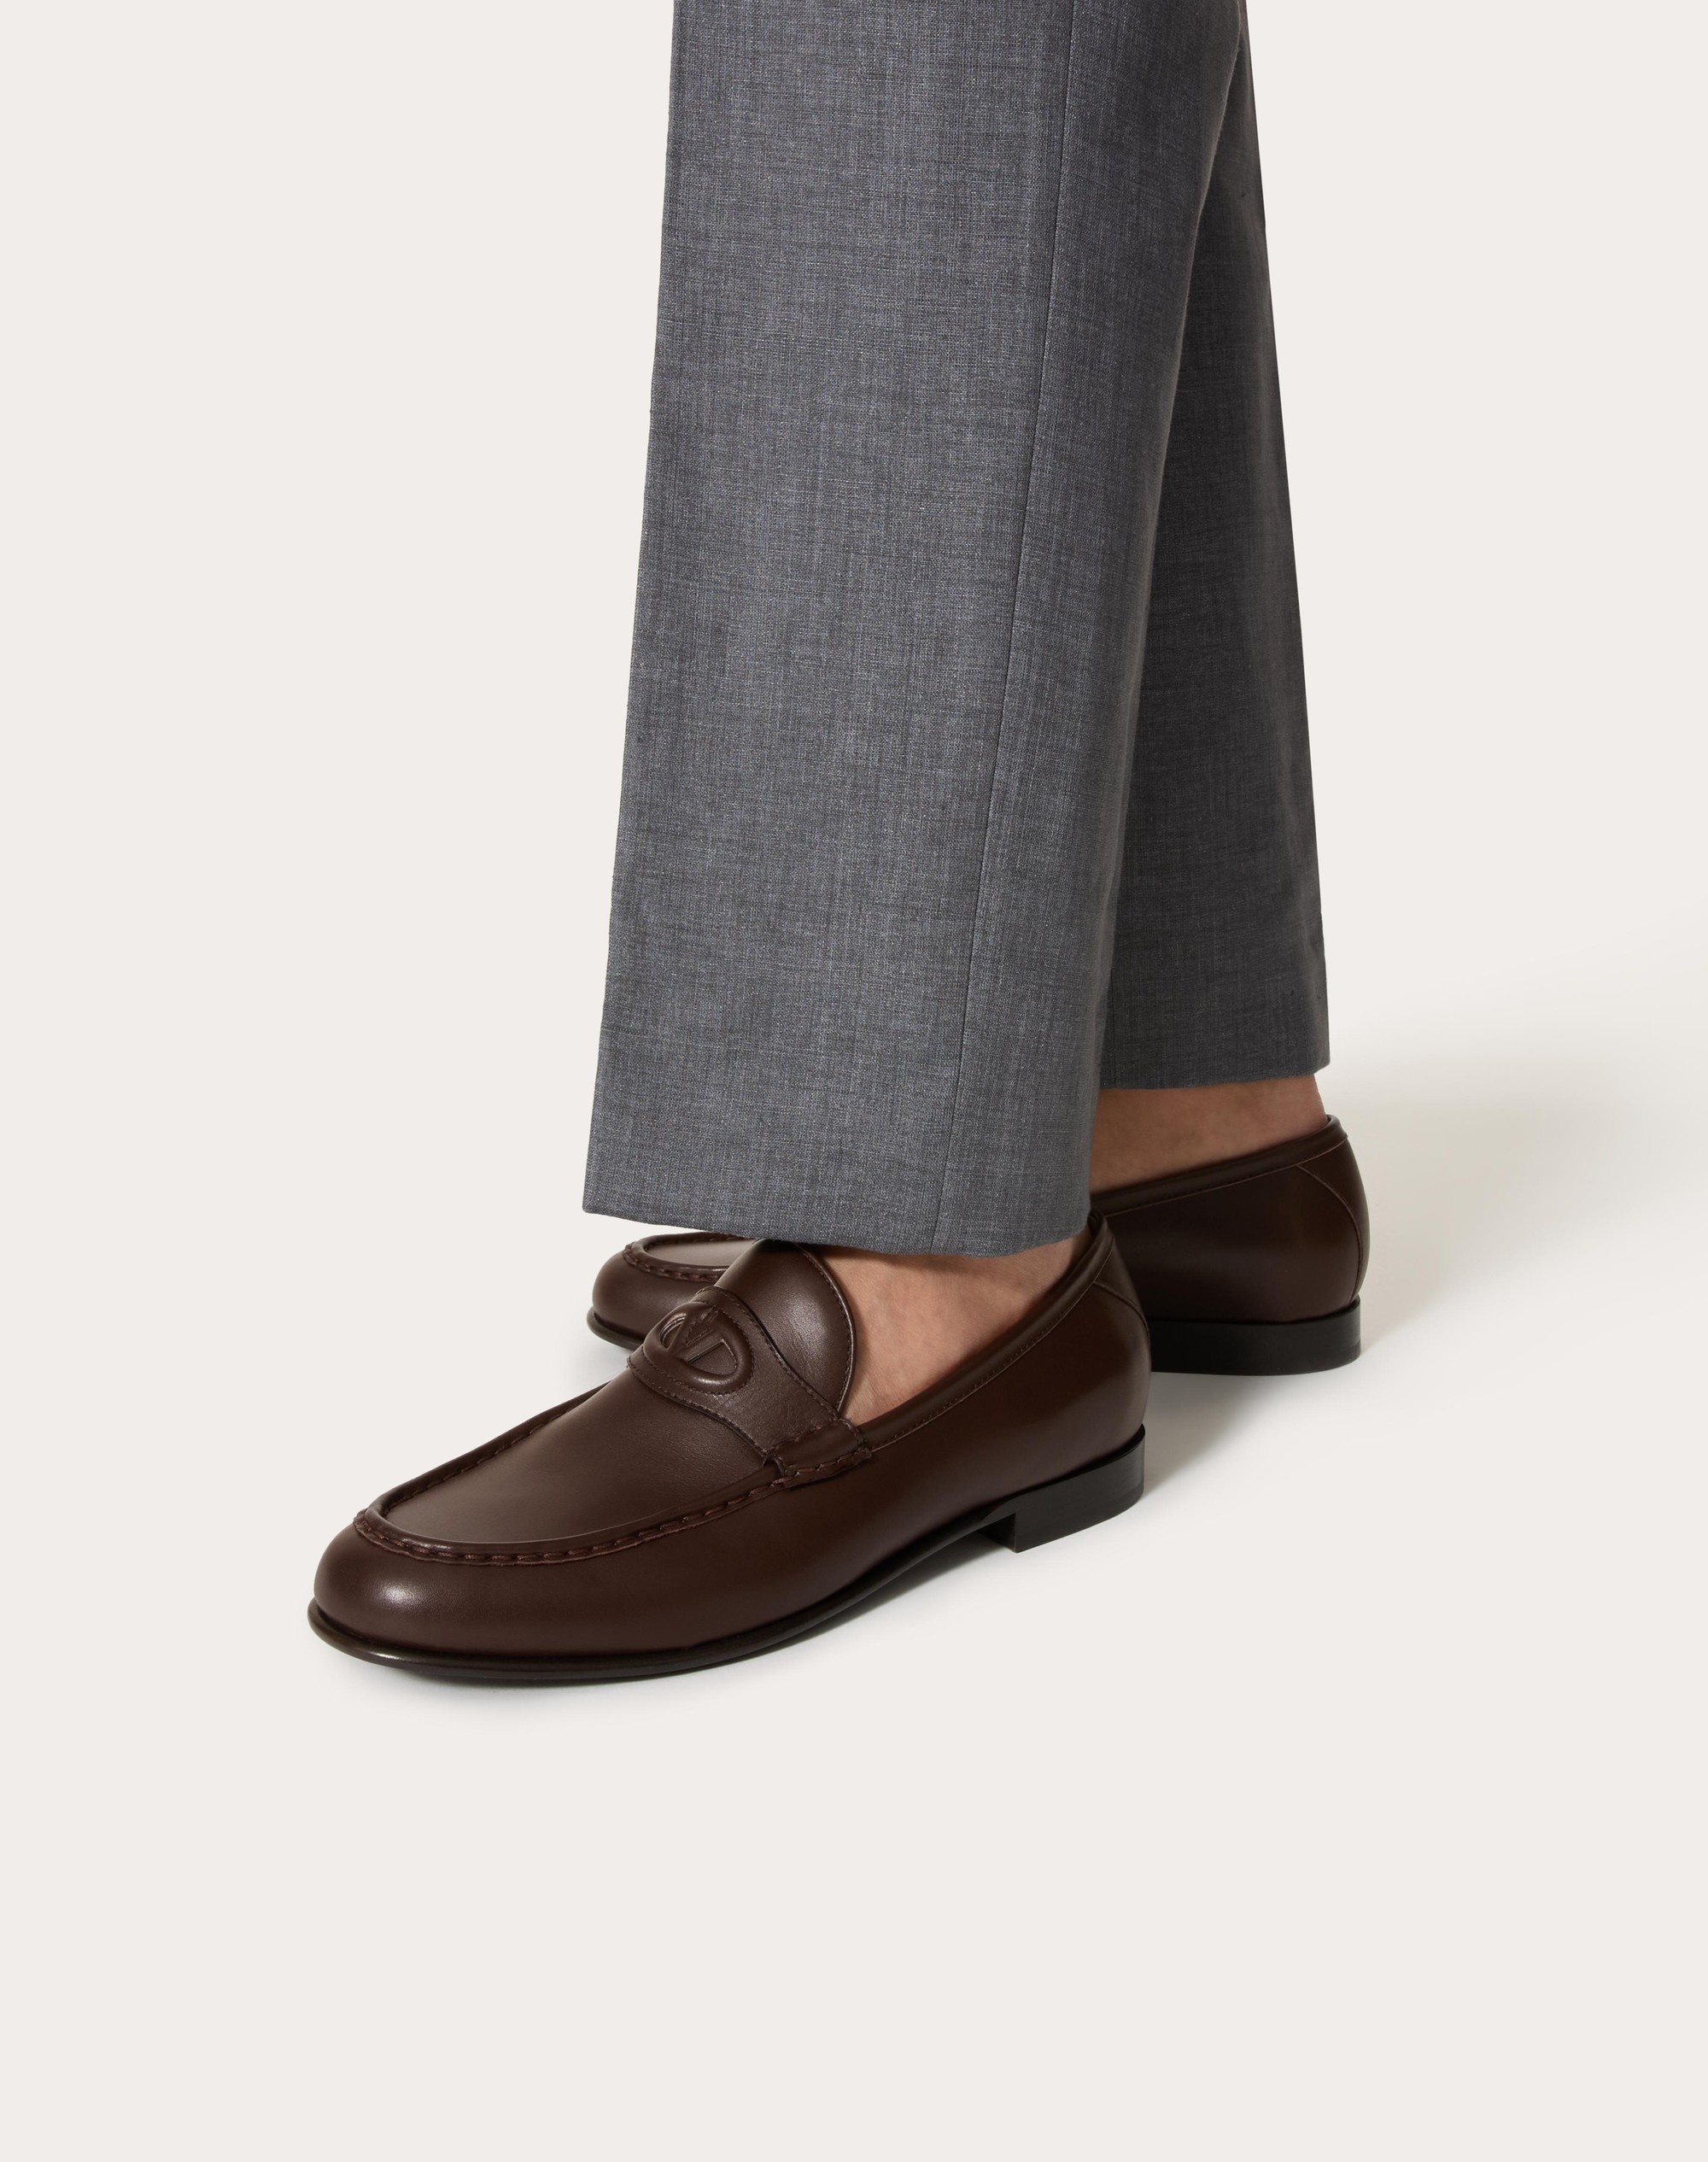 VLOGO THE BOLD EDITION CALFSKIN LEATHER LOAFER - 6